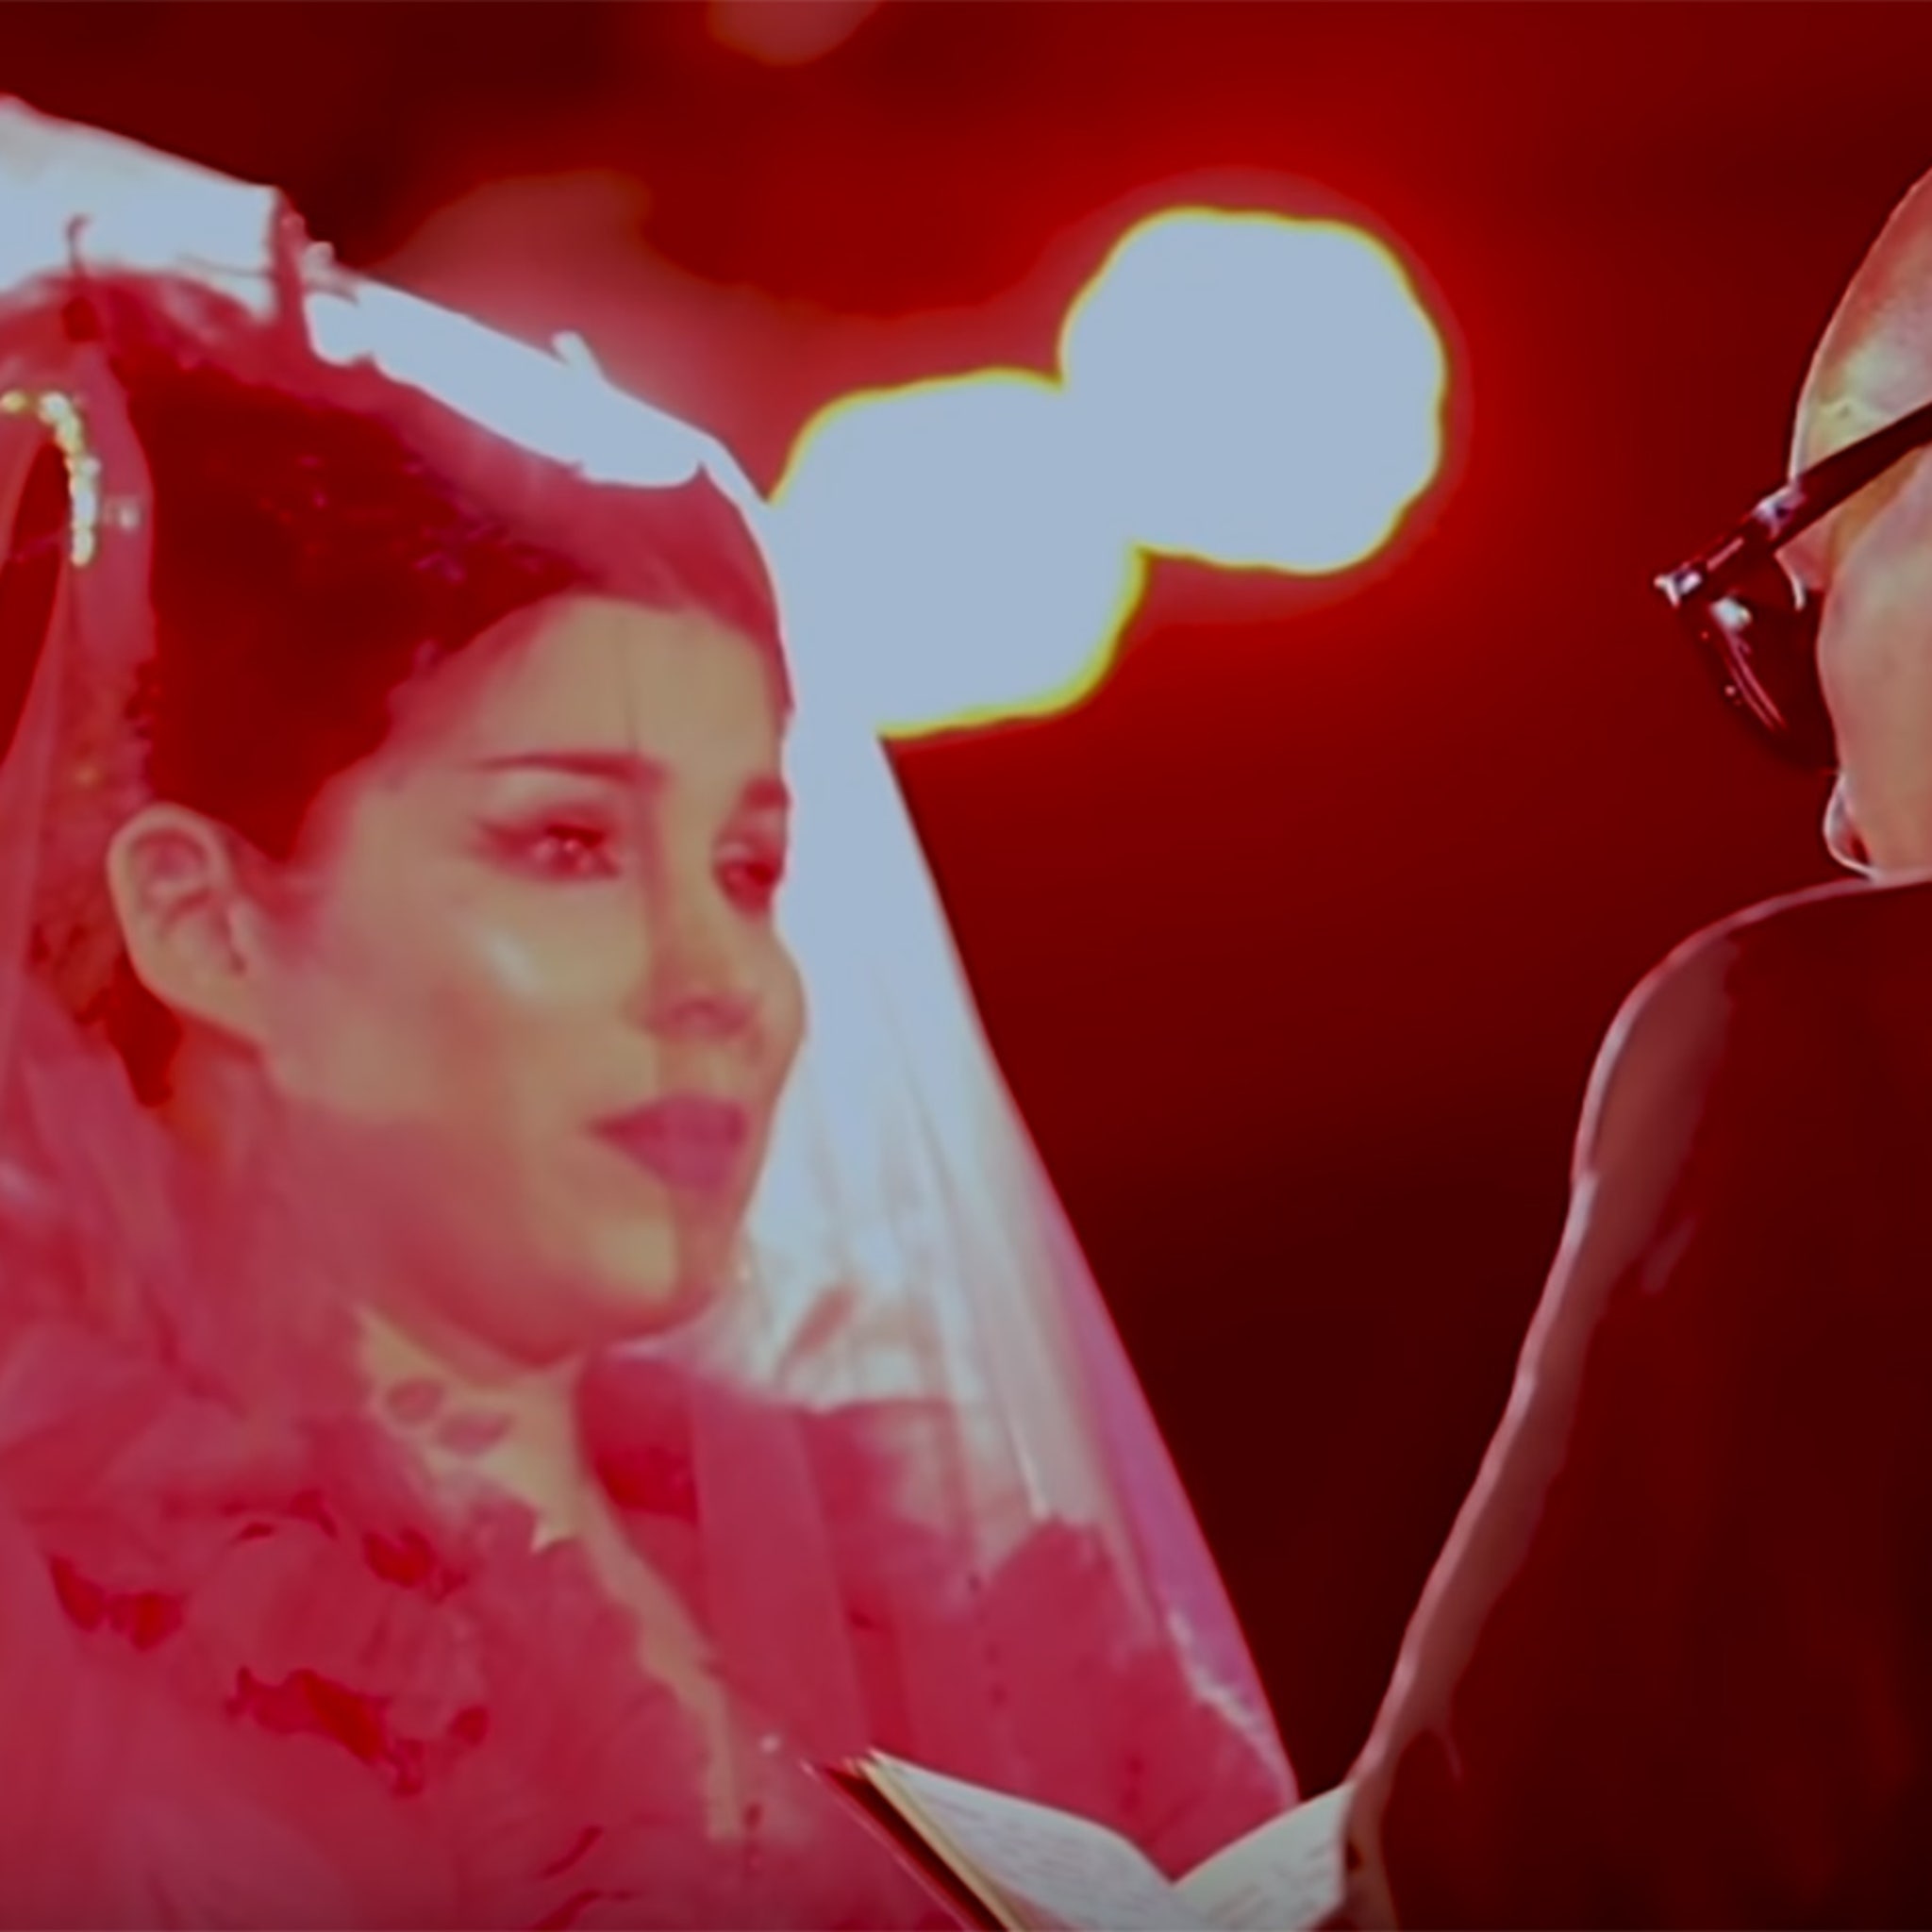 Kat Von D Releases Wedding Video: Vows, Red Latex Contortionists Her Musical Performance